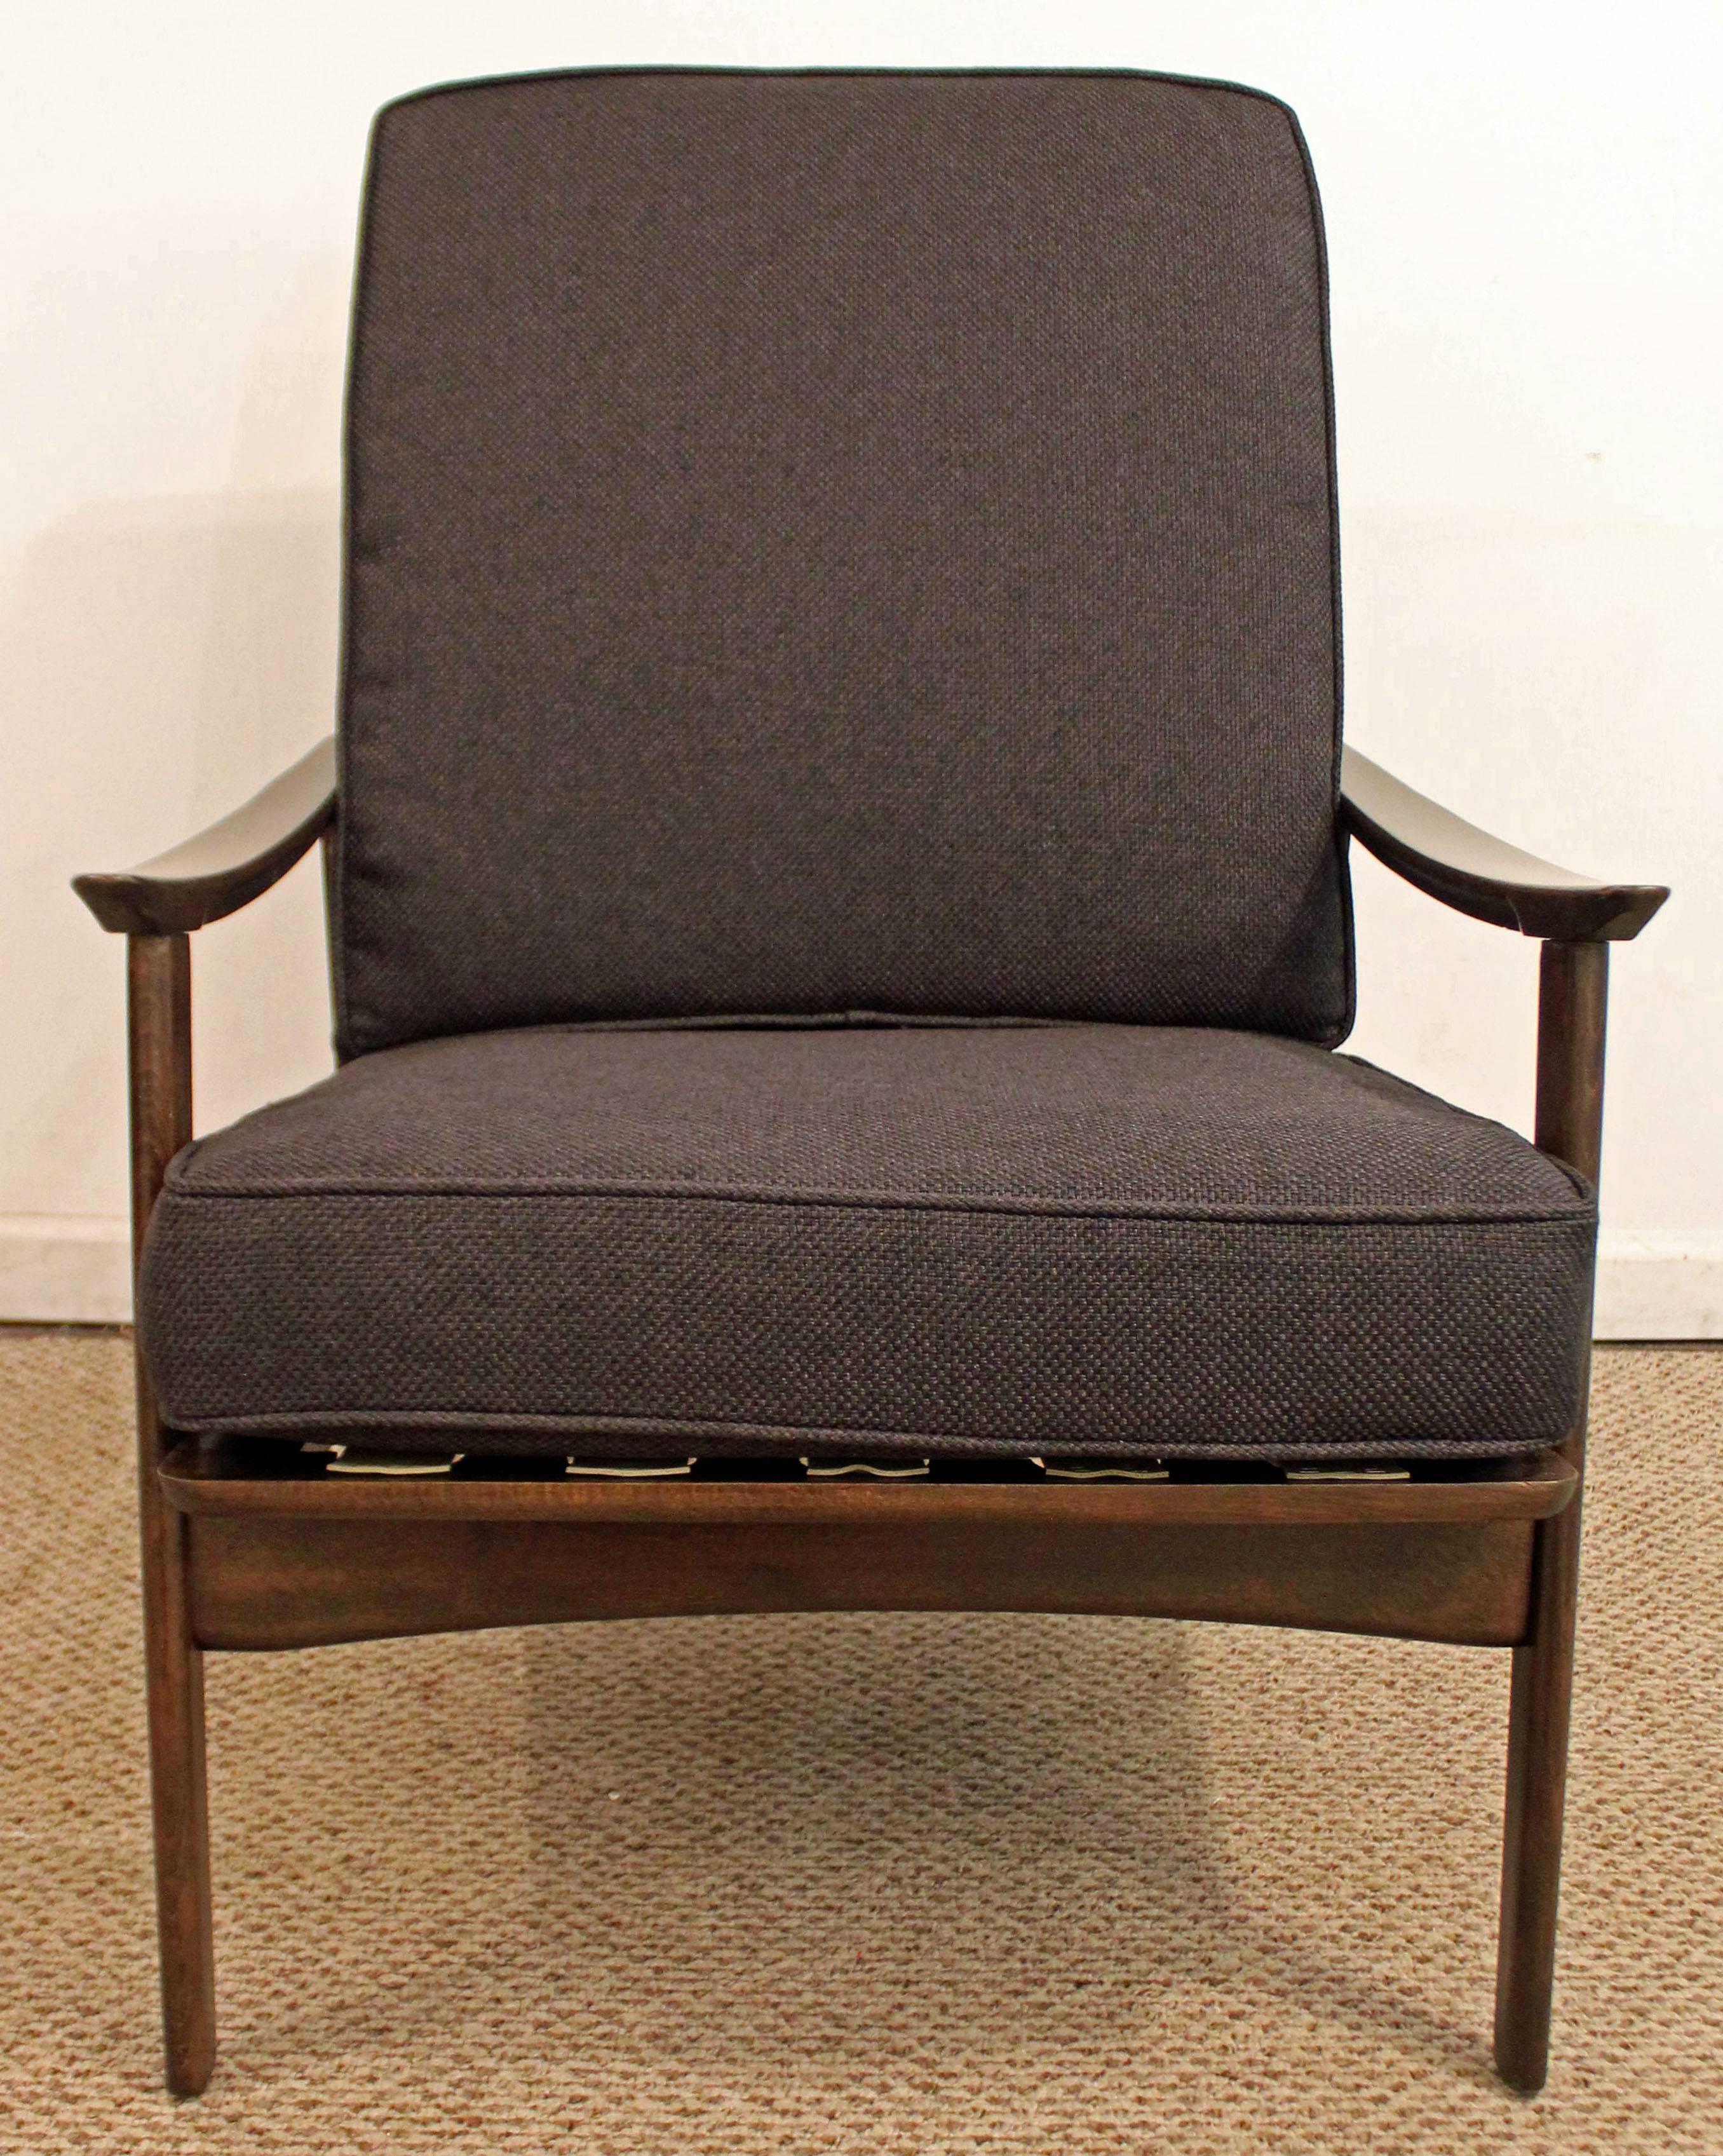 This walnut lounge chair has been completely redone; refinished, restrapped, recushioned, and reupholstered with black fabric.